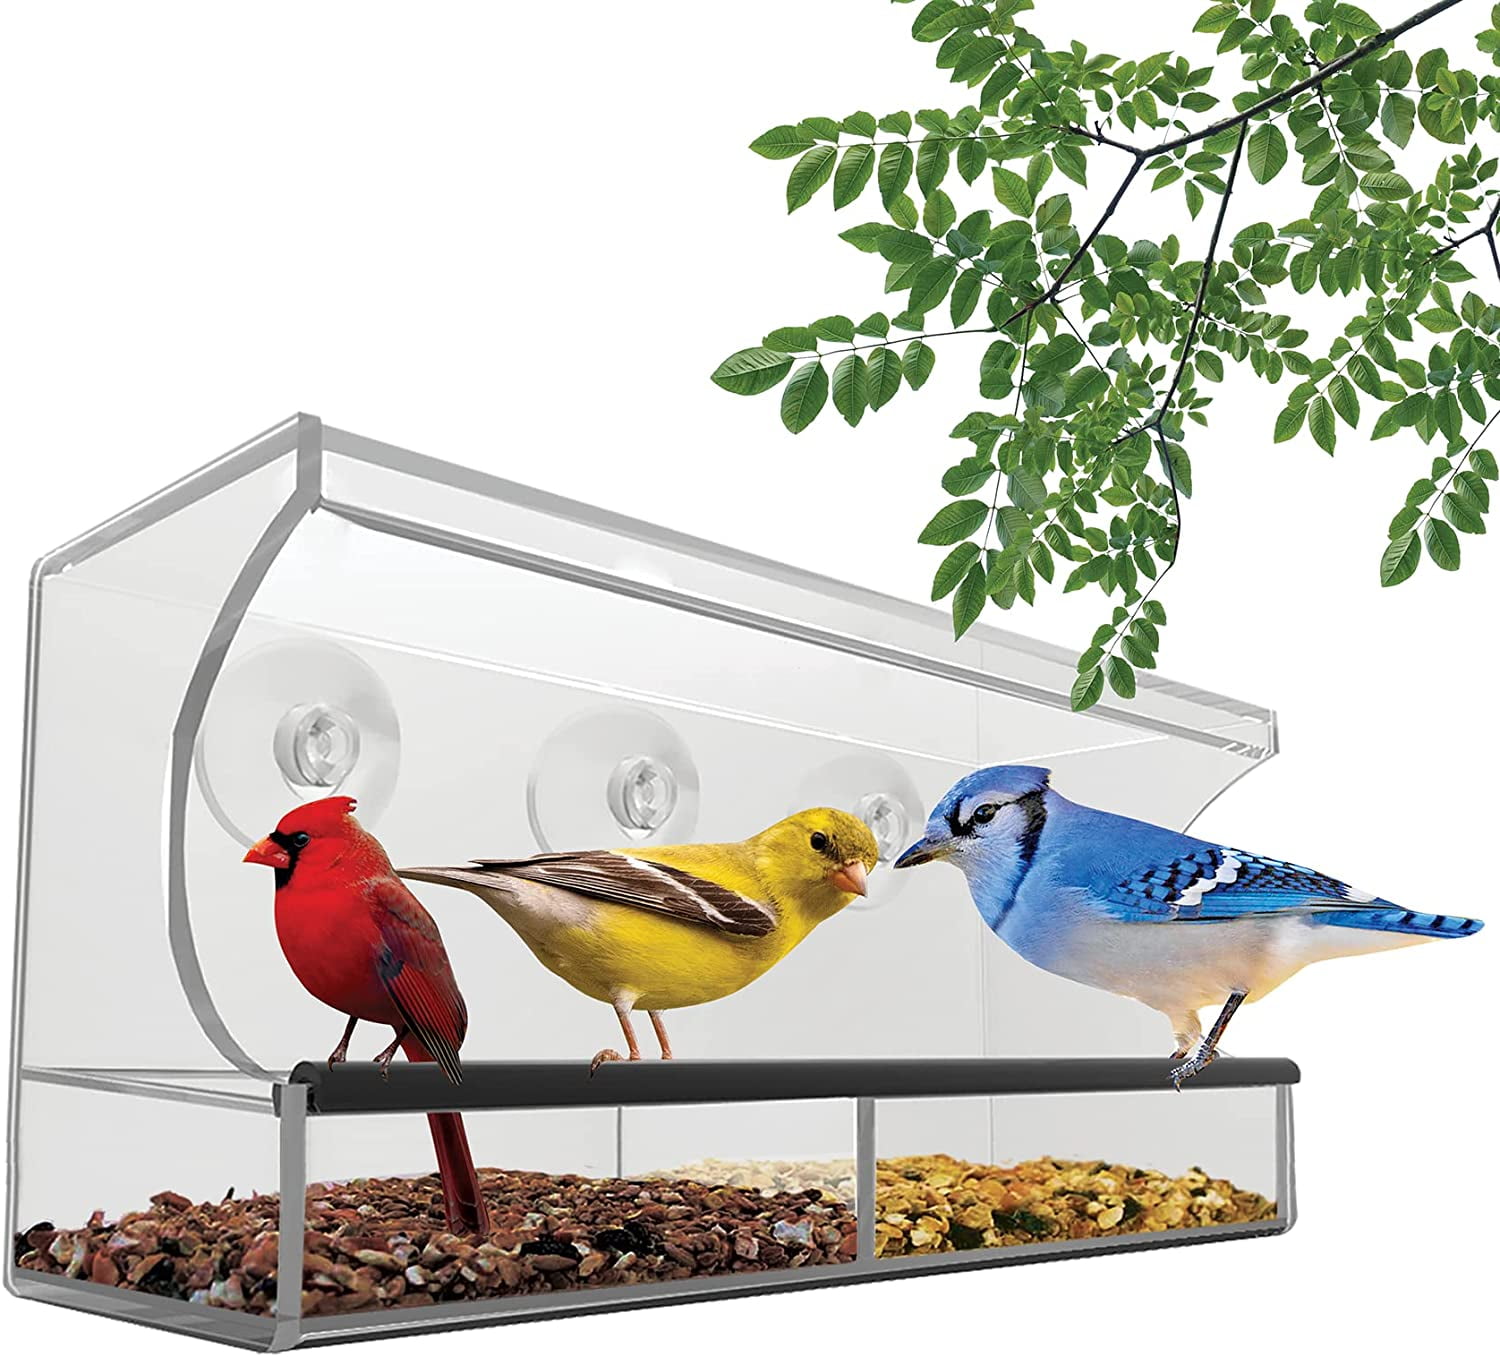 NEW Window BIrd Feeder  Food Tray and Suction Cup 6" W x 6" H x 2.5" D 